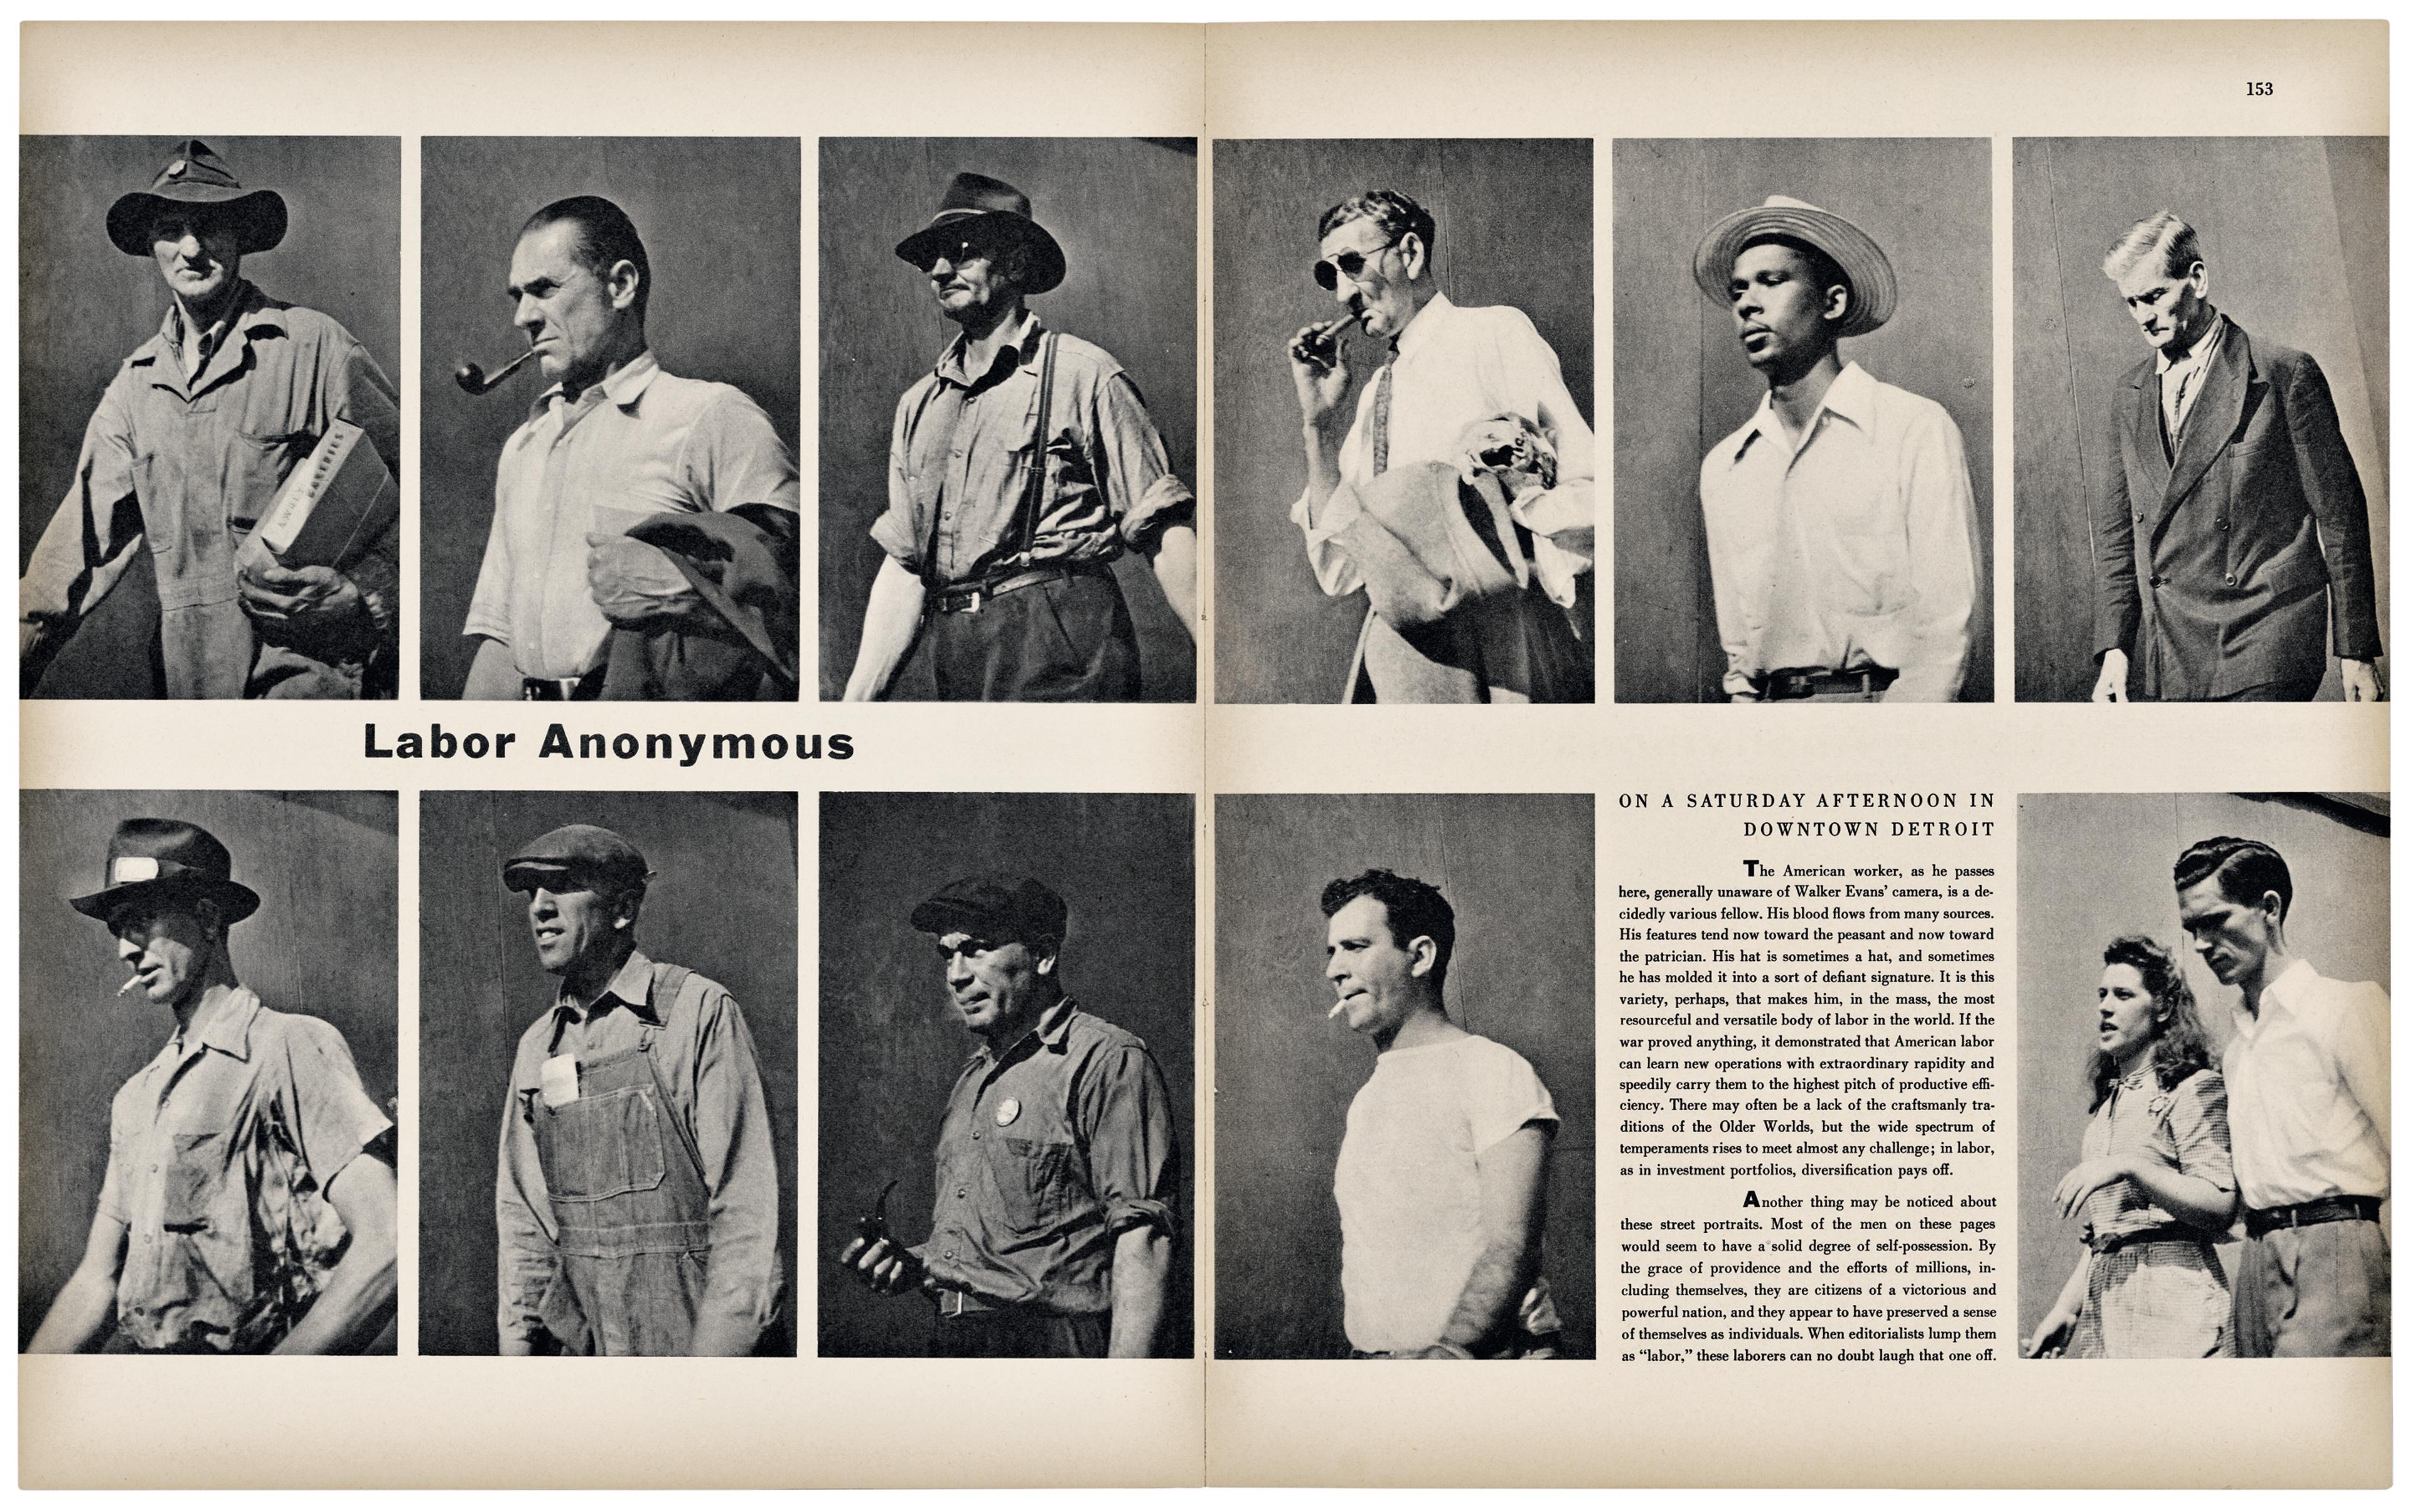 Image: Walker Evans, page spread for 'Labor Anonymous', Fortune, November 1946. Courtesy of The Metropolitan Museum of Art, New York.